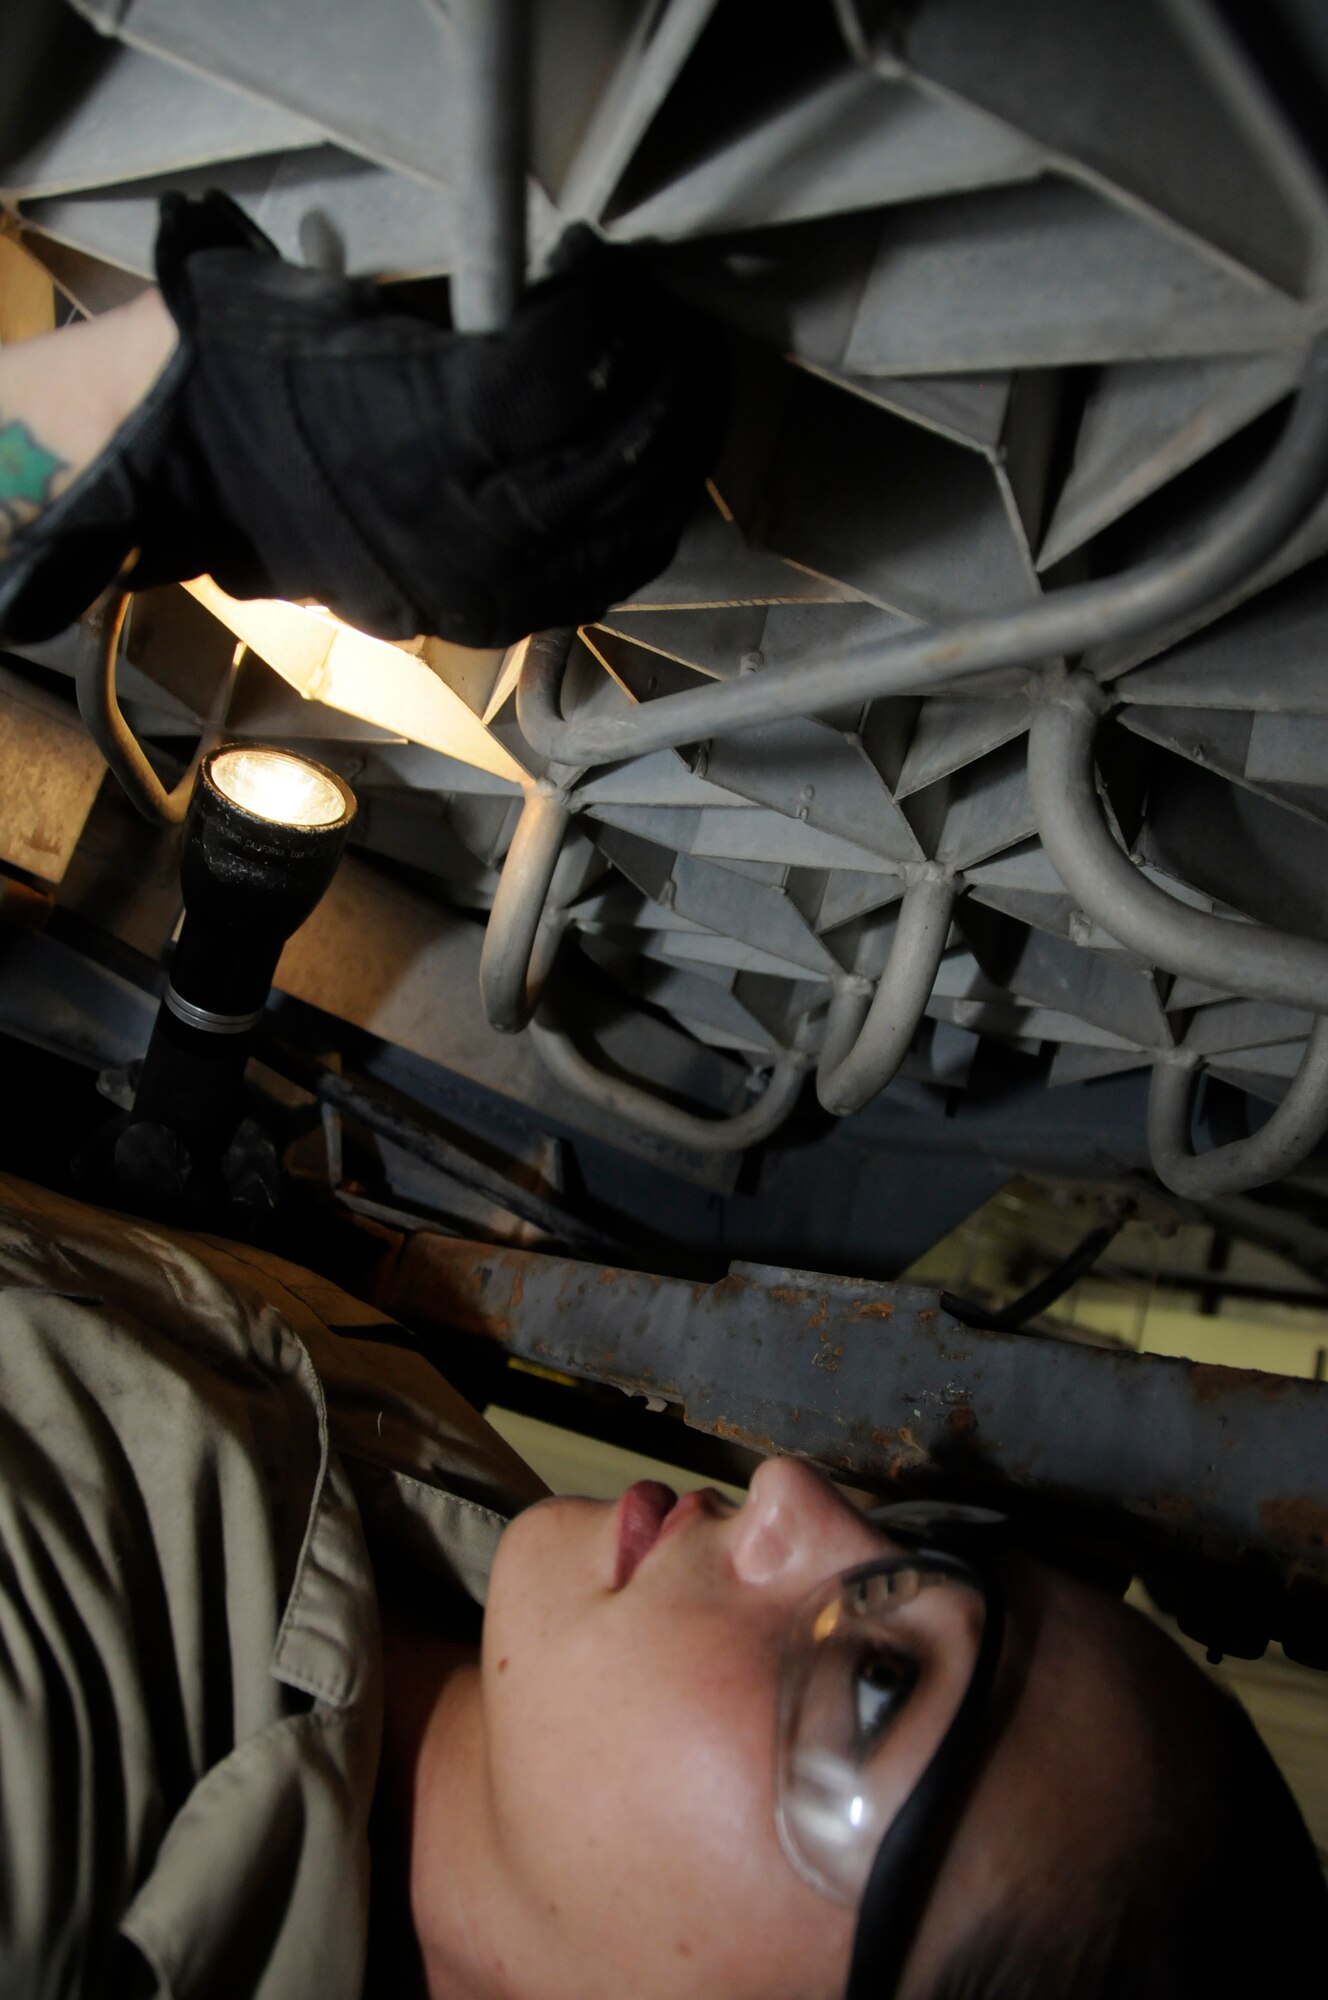 Staff Sgt. Elaina Bagnato, aerospace ground equipment (AGE) maintainer assigned to the 379th Expeditionary Maintenance Squadron, uses a flashlight to check for cracks under a liquid nitrogen cart Aug. 23, 2008, at an undisclosed air base in Southwest Asia. Sergeant Bagneto is responsible for maintaining equipment required to support Air Force aircraft while on the tarmac. Sergeant Bagneto, a native of Ventura, Calif., is deployed from Grand Forks Air Force Base, N.D., in support of Operations Iraqi Freedom, Enduring Freedom and Joint Task Force-Horn of Africa. (U.S. Air Force photo by Staff Sgt. Darnell T. Cannady/Released)